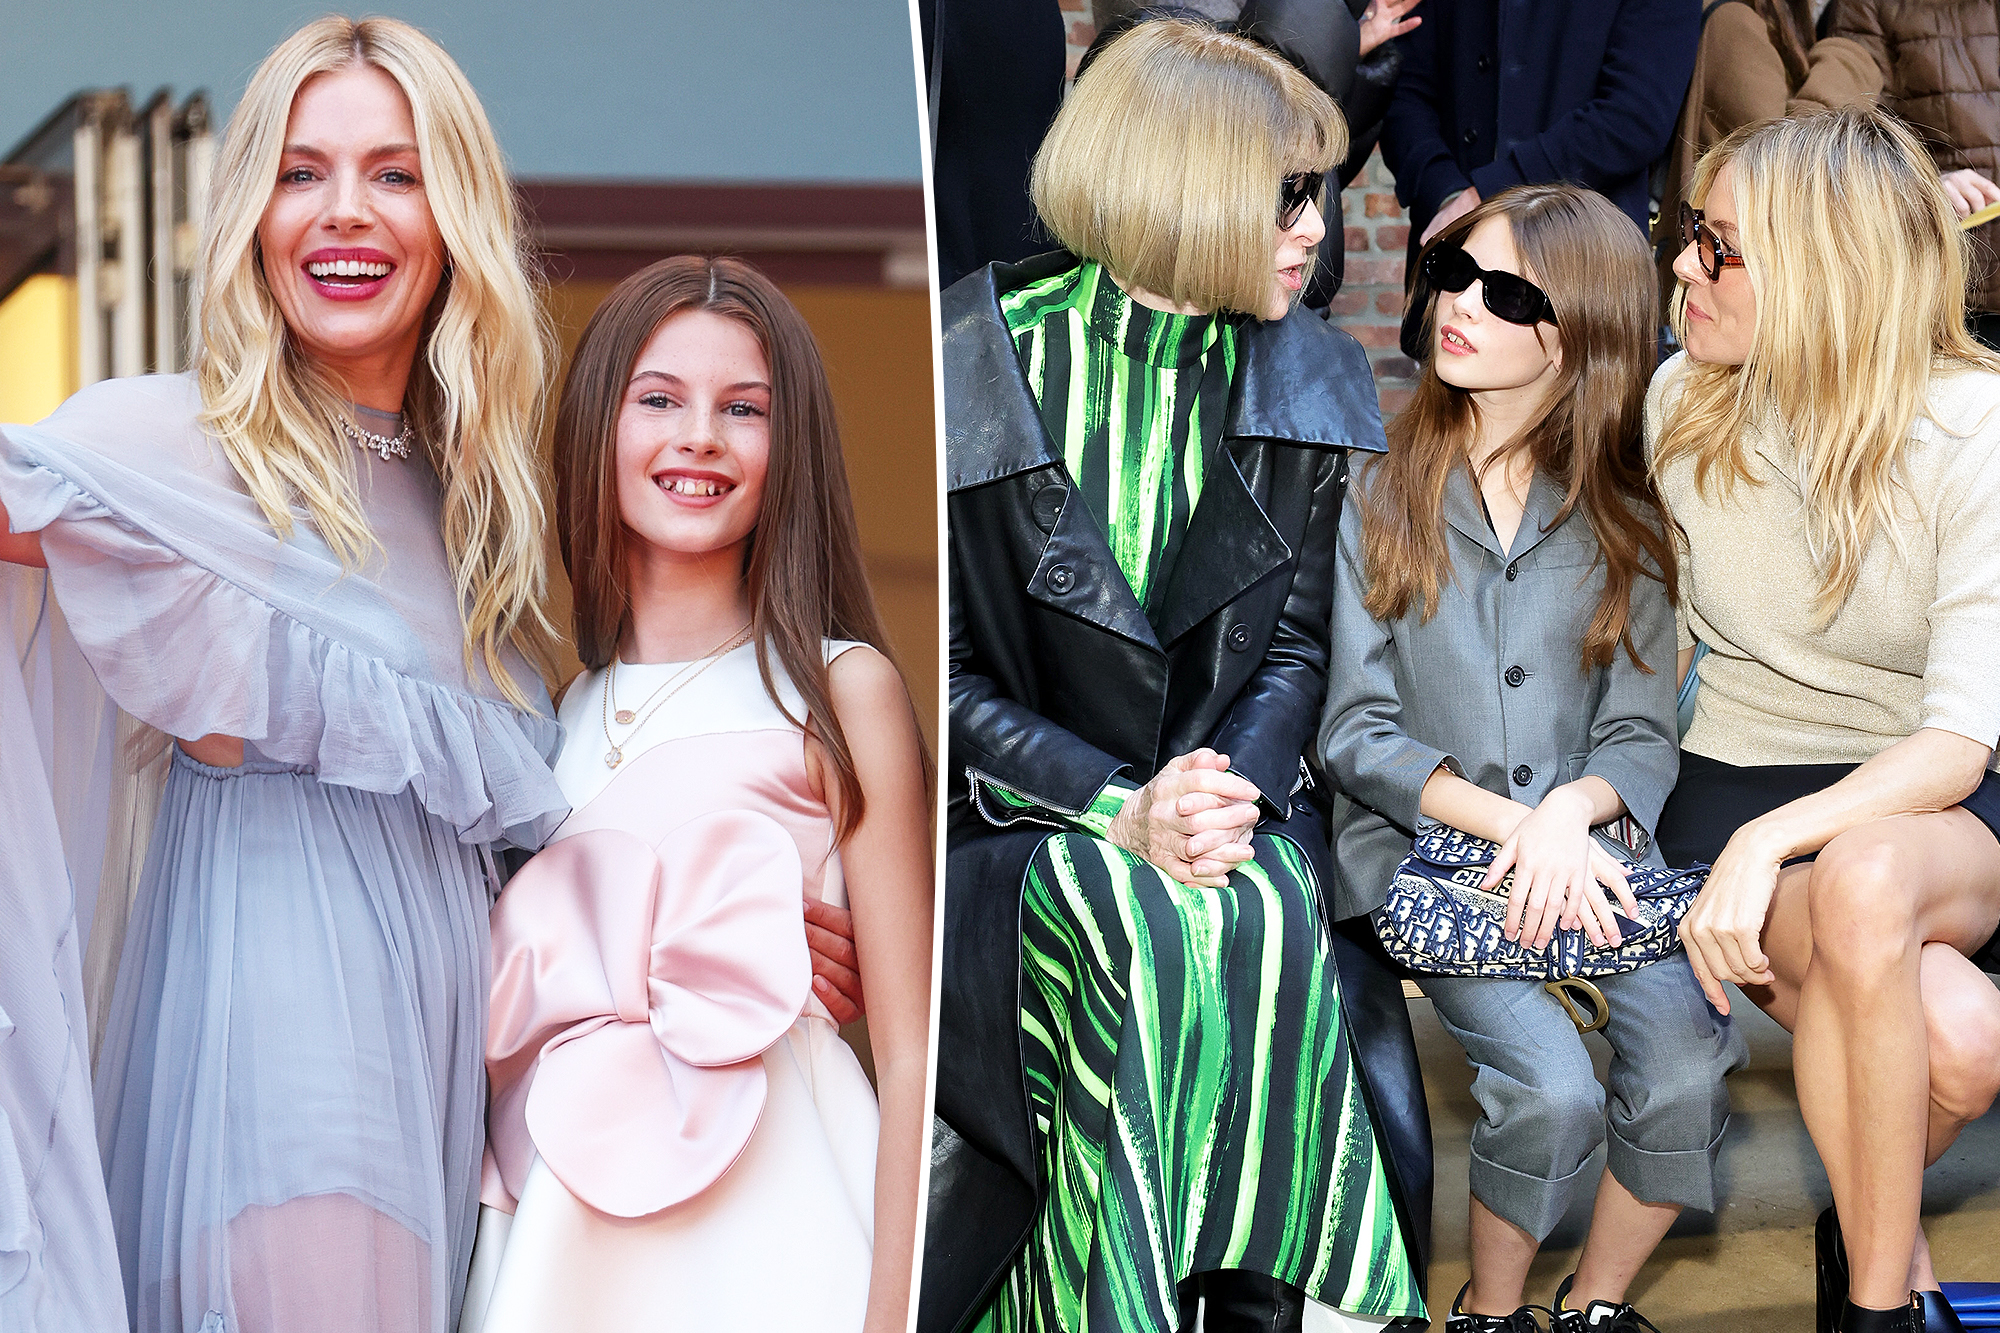 Sienna Miller says her ‘fashion monster’ 11-year-old daughter judges her style ‘like a young Anna Wintour’